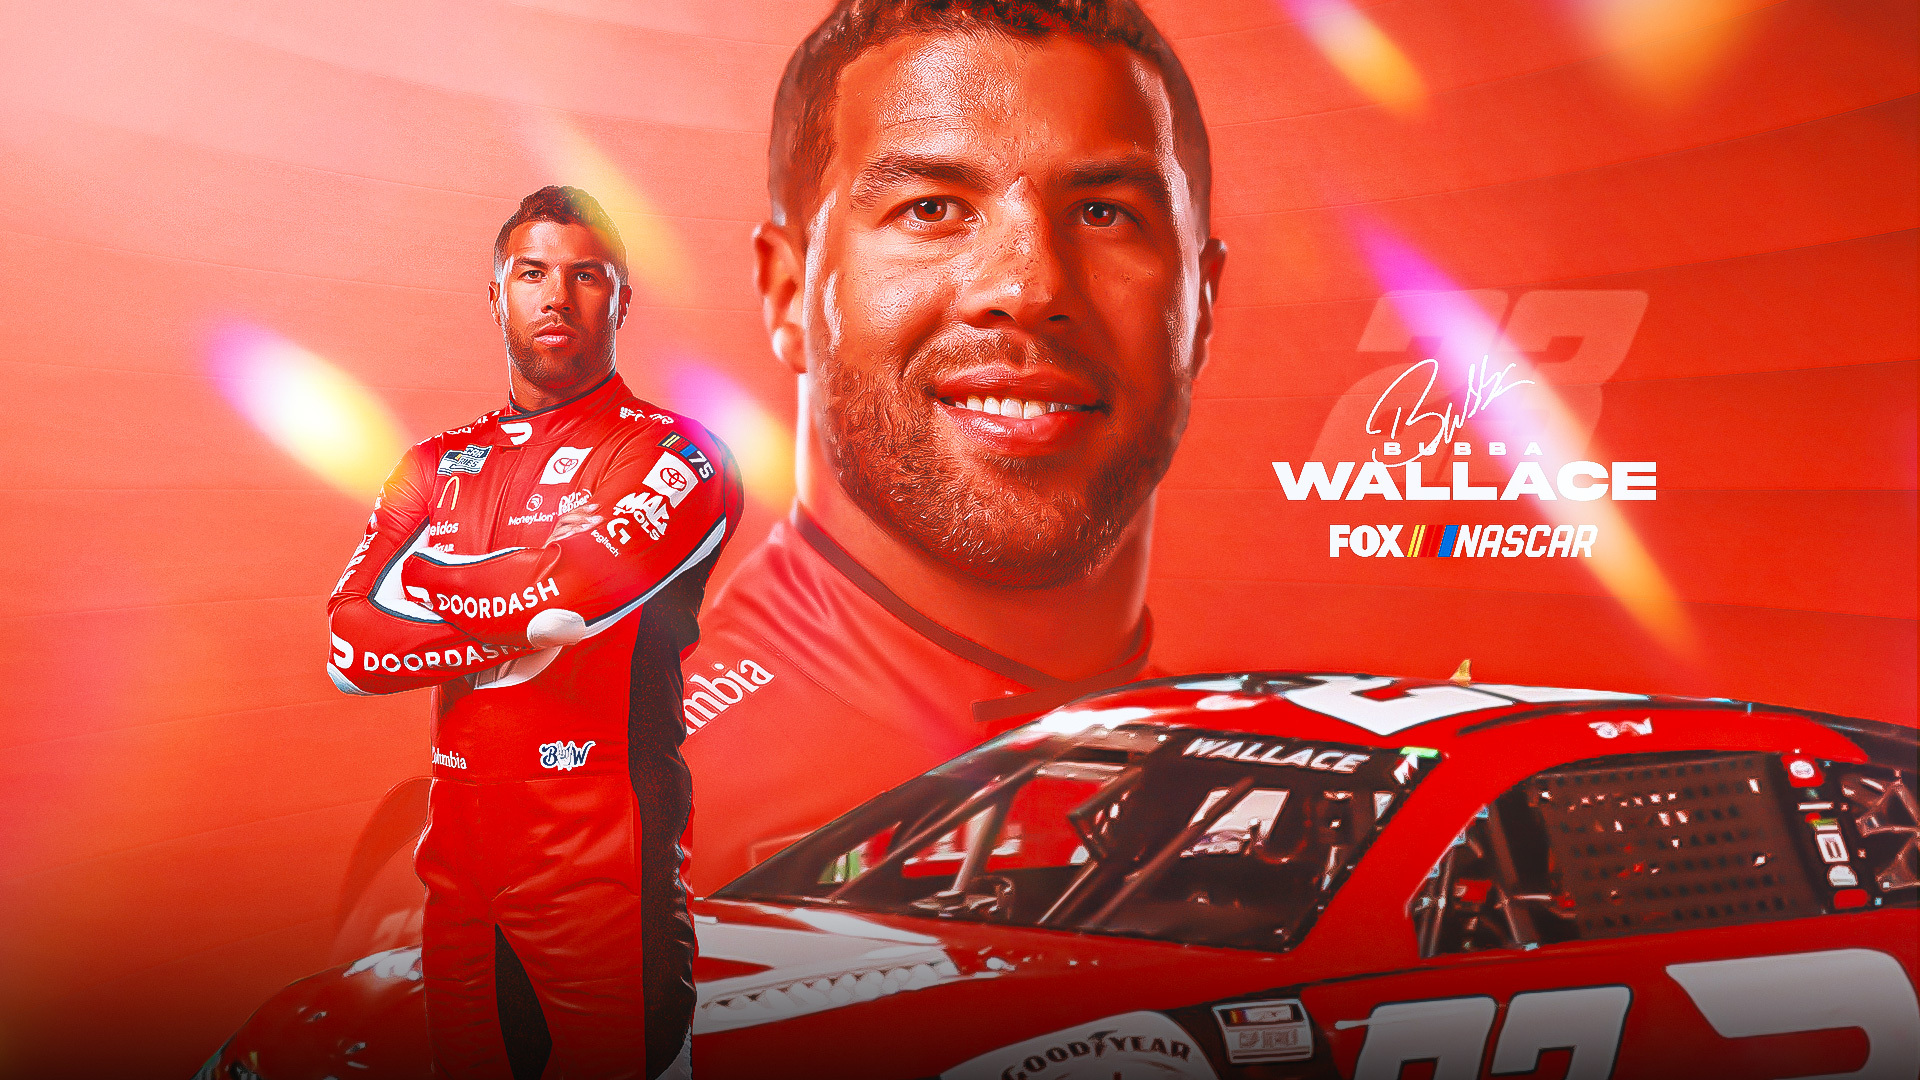 Bubba Wallace can't escape the spotlight. But he just wants to win races